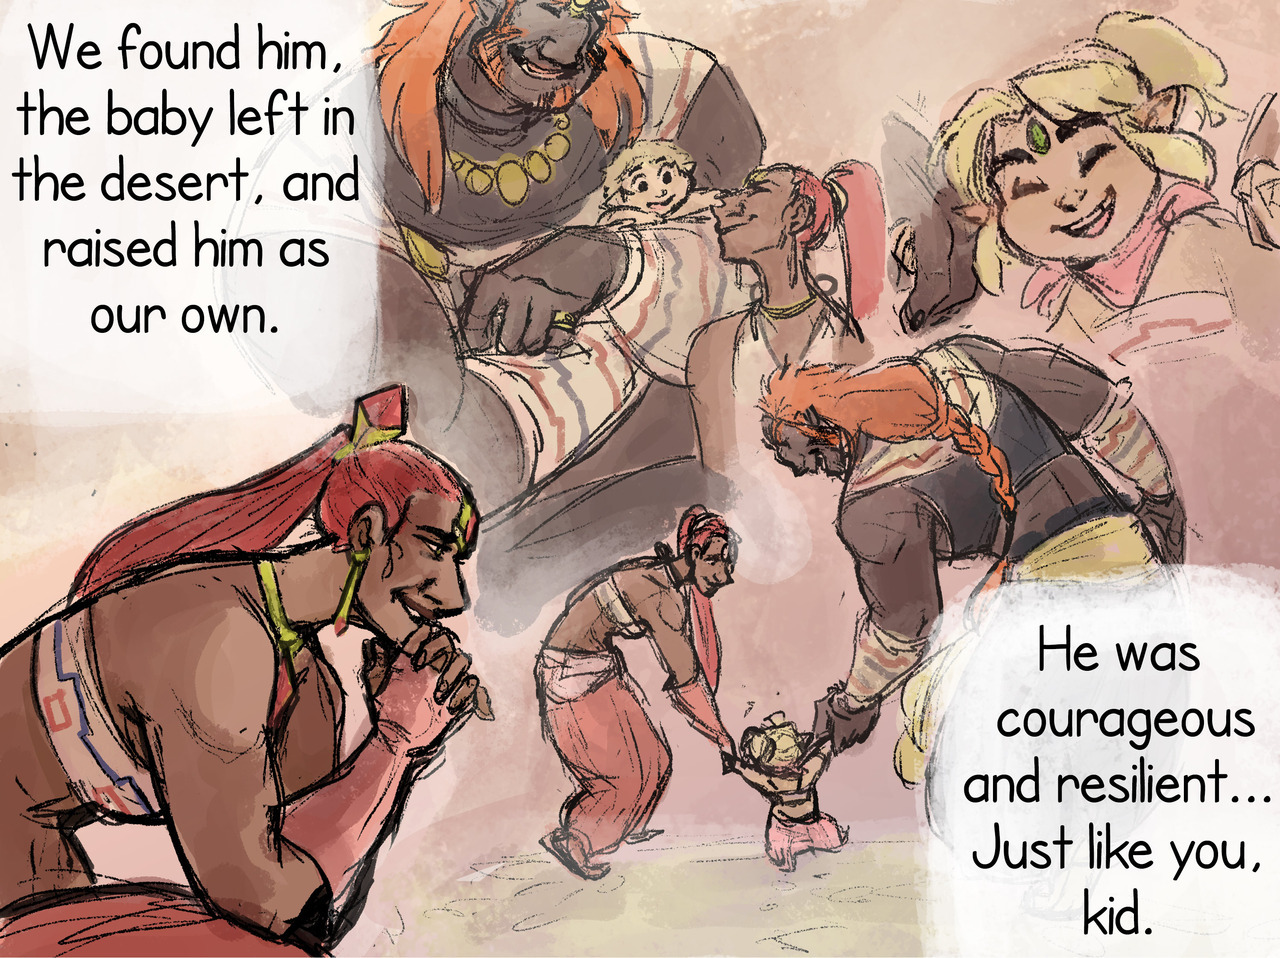 Growing Up Gerudo — Another holiday-themed birthday request! This